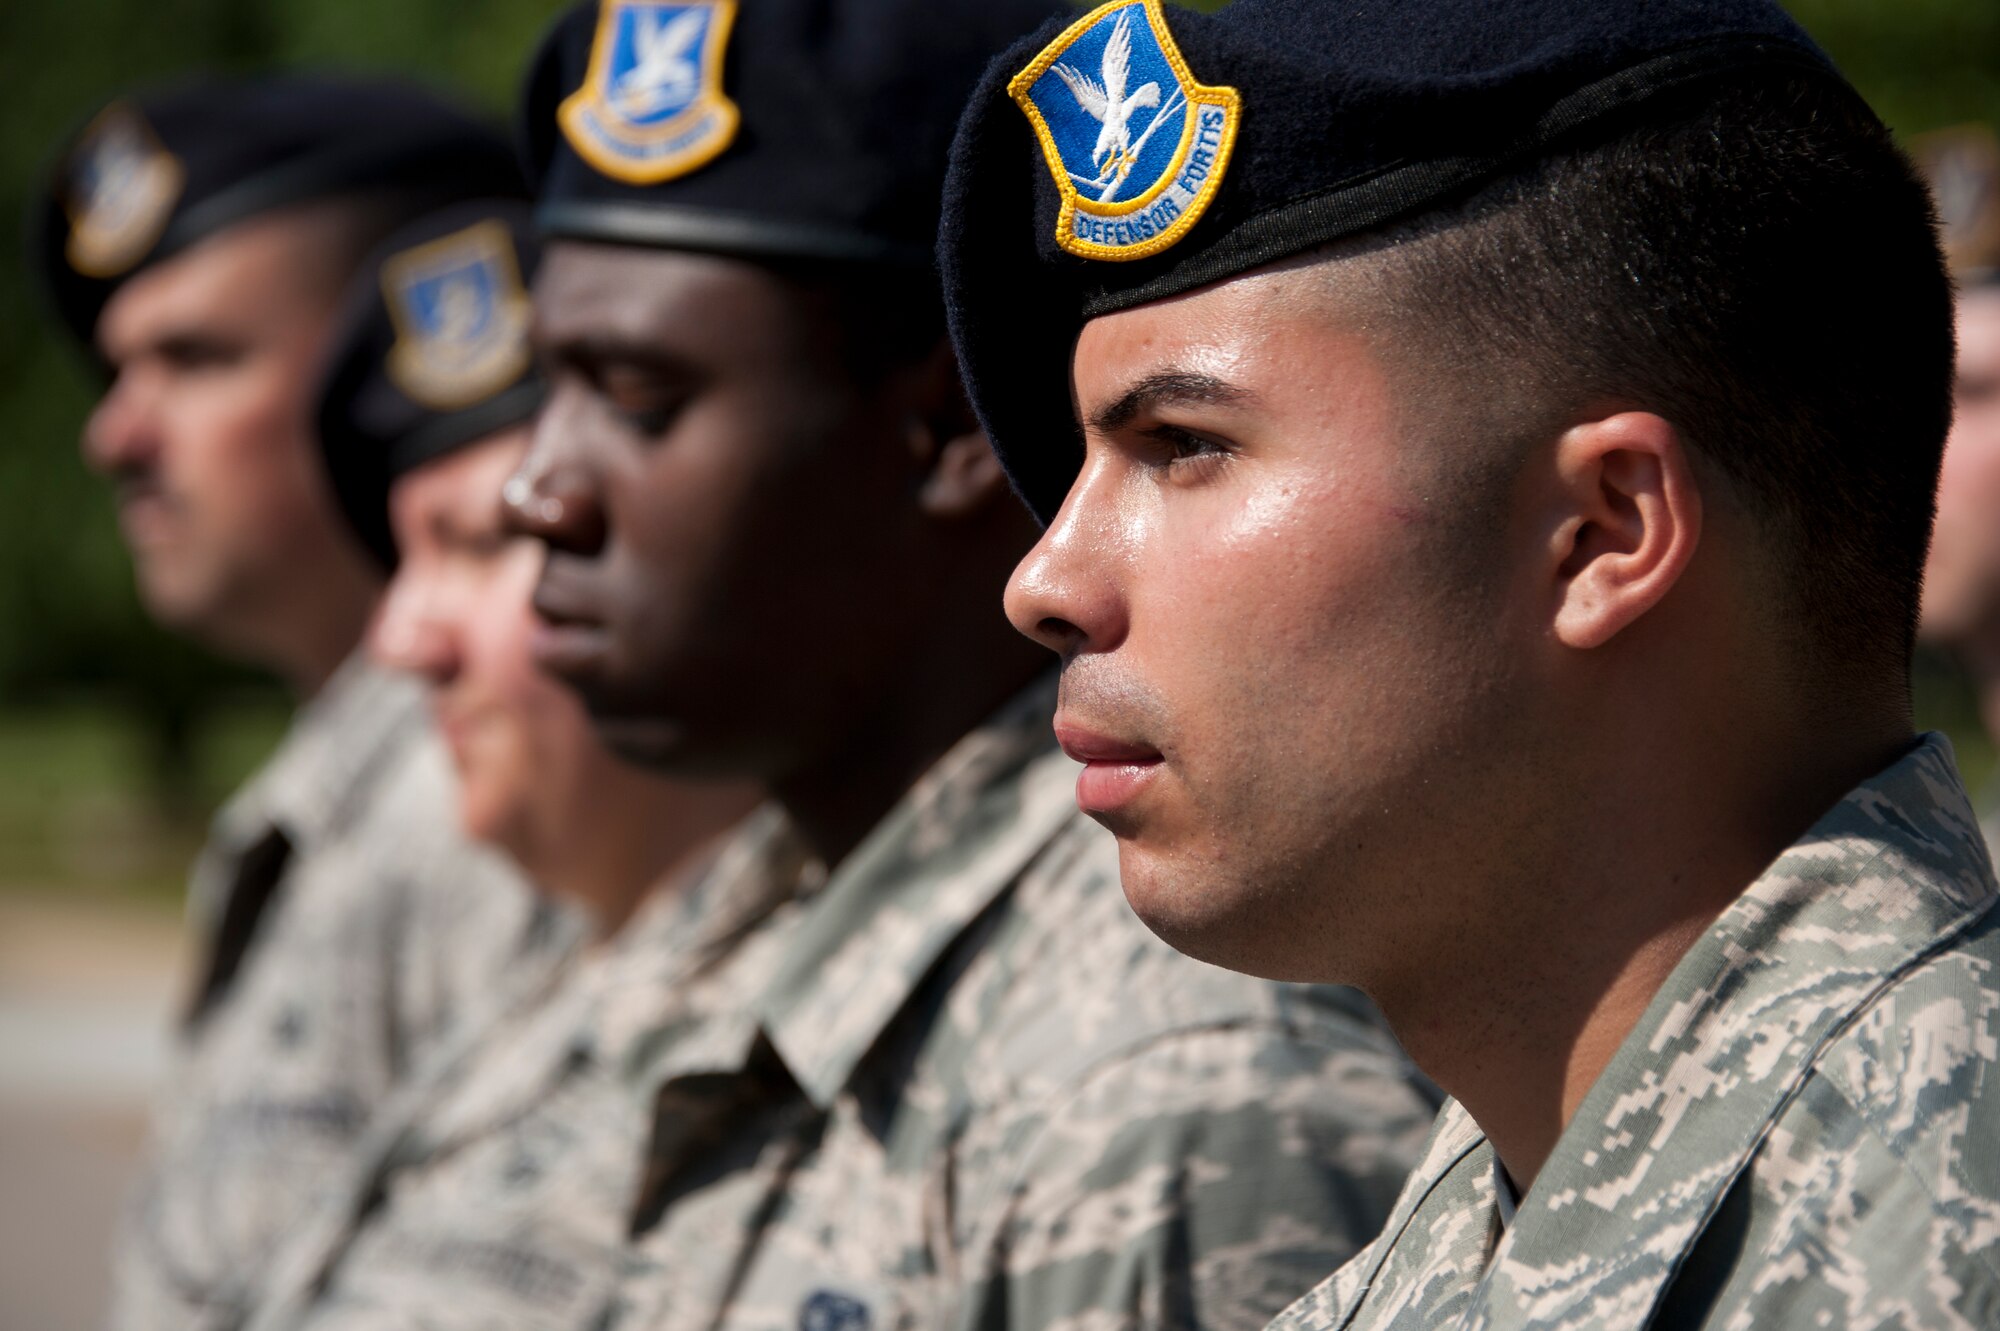 Staff Sgt. Eddie Sang, 42nd Security Forces Squadron, stands in formation during a National Police Week retreat ceremony here, May, 16, 2014. The ceremony included speeches from retired and active duty security forces members as well as a 21-gun salute. The squadron held events on base all week to pay tribute to law enforcement members who made the ultimate sacrifce in the line of duty.(U.S. Air Force photo by Staff Sgt. Natasha Stannard.)